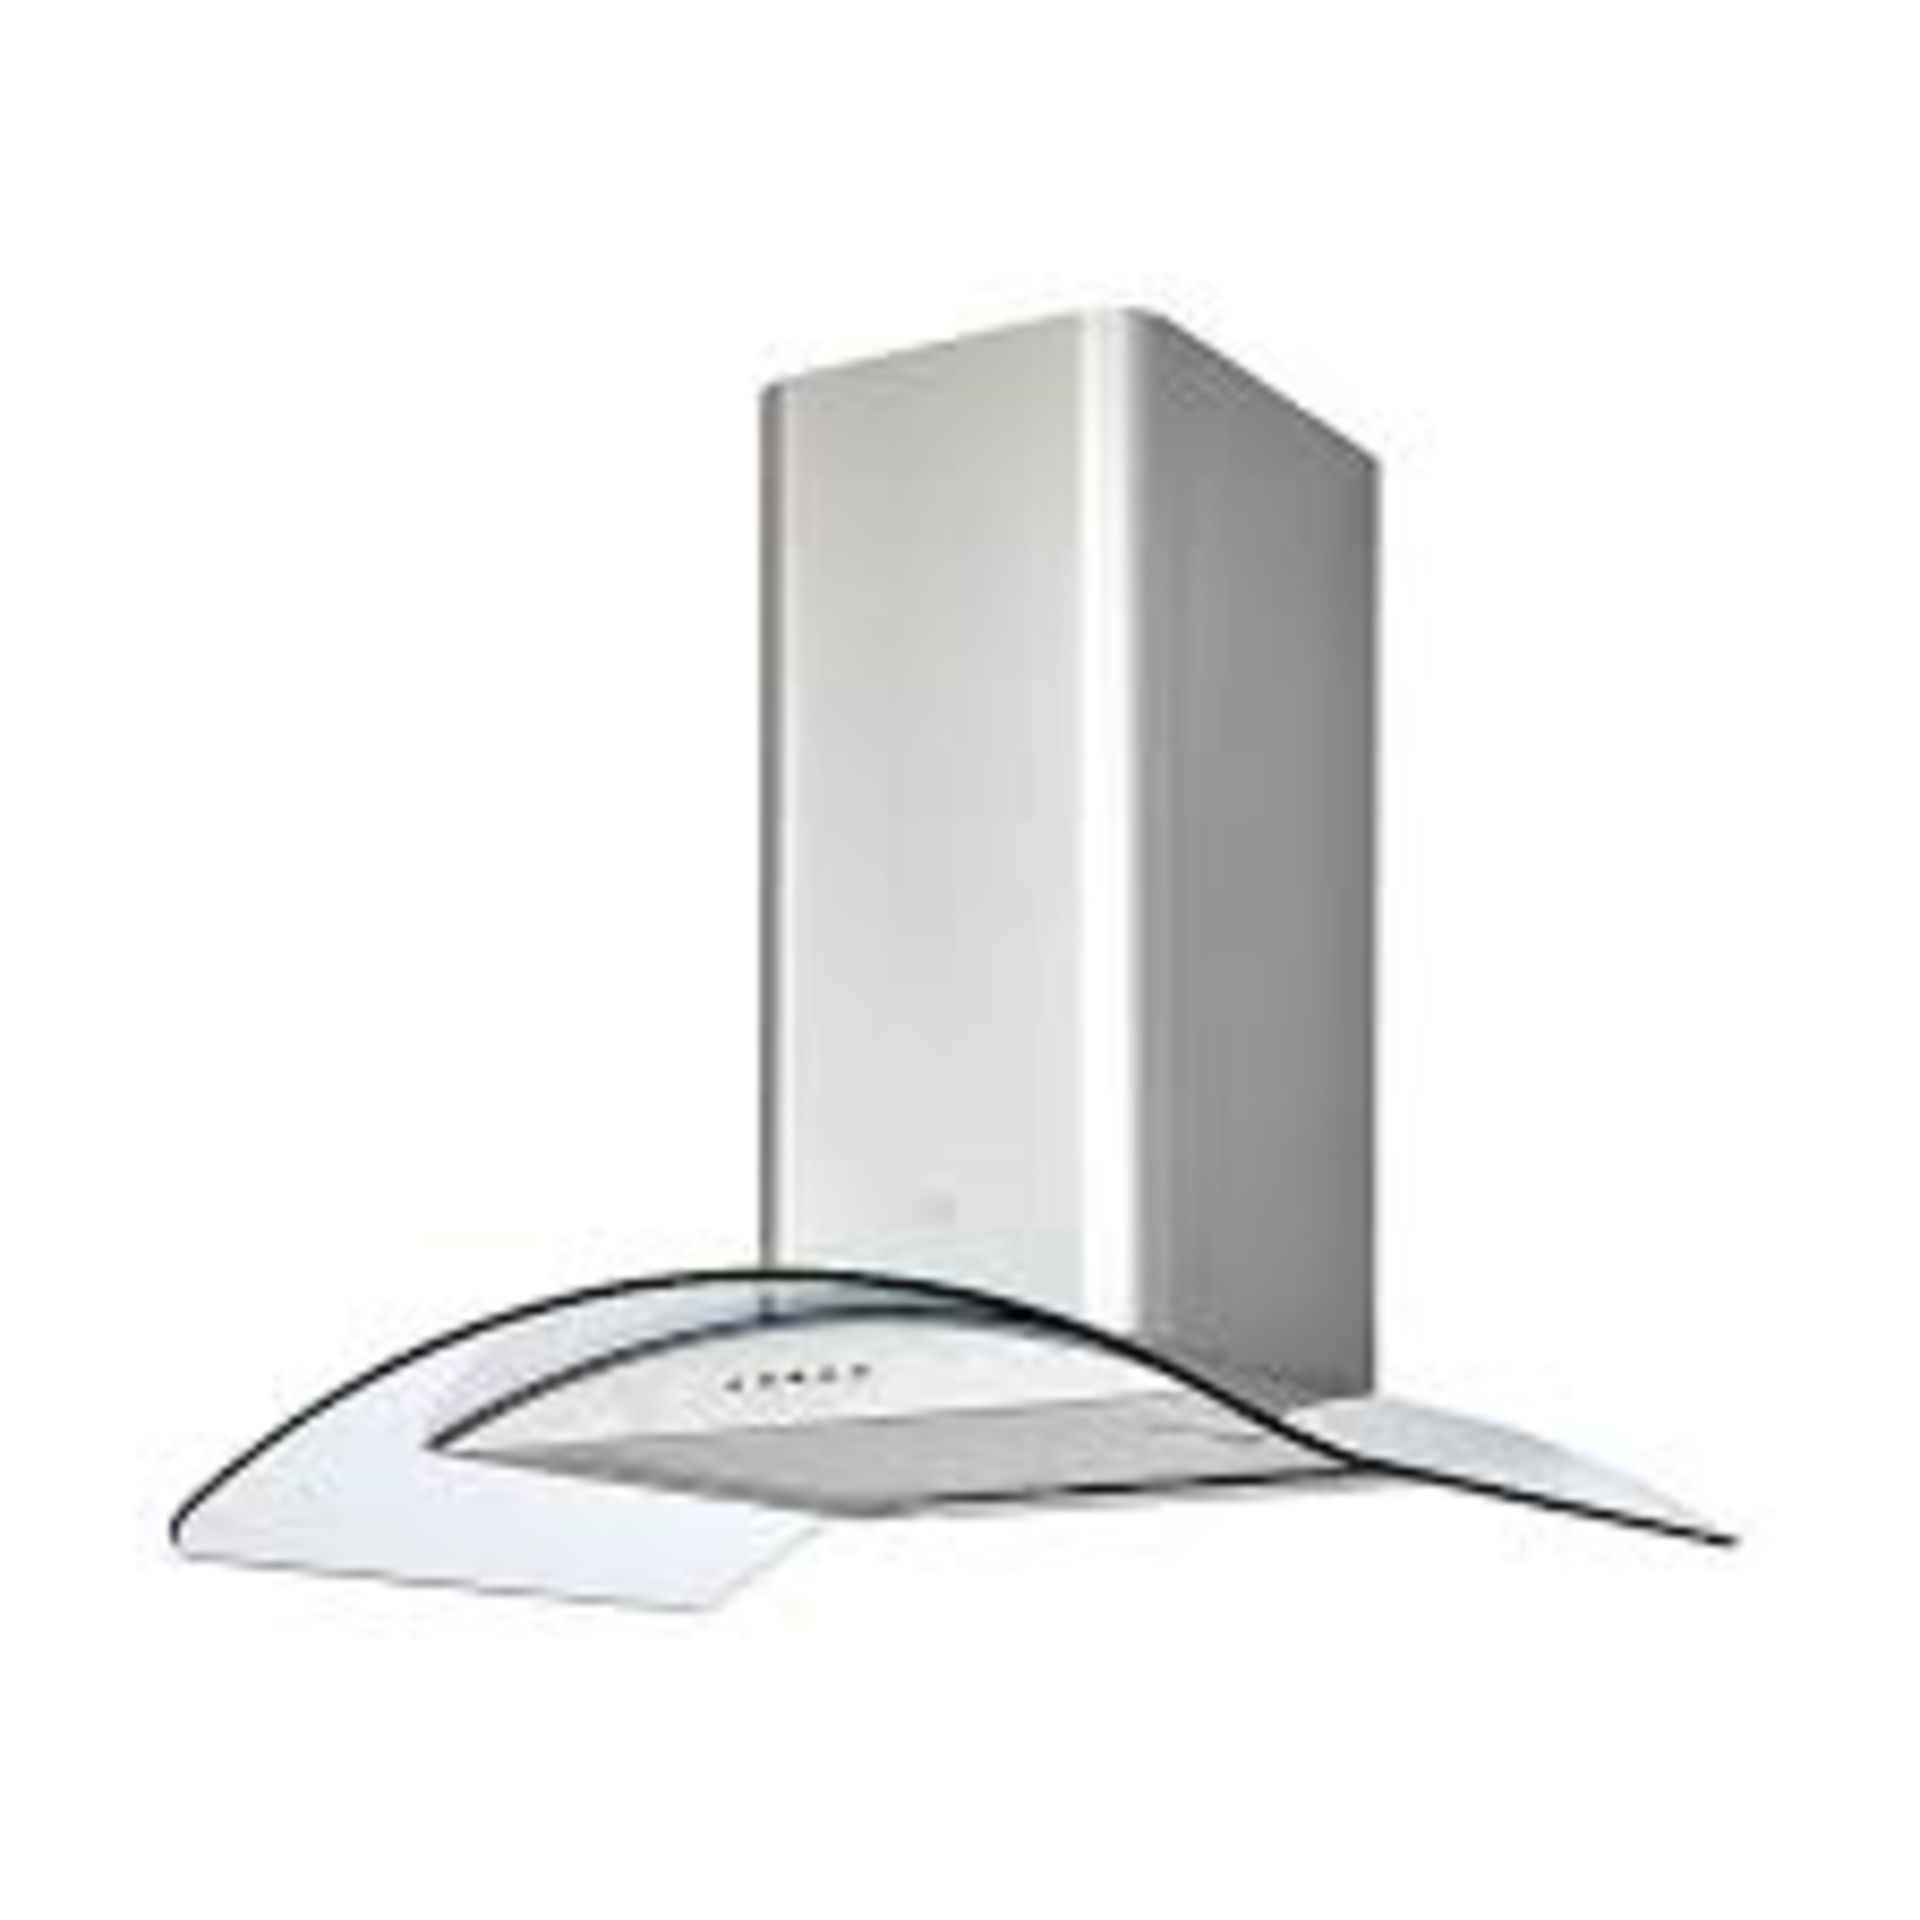 Cooke & Lewis CLCGS60 Stainless steel Curved Cooker hood. - PW. Keep your kitchen free from